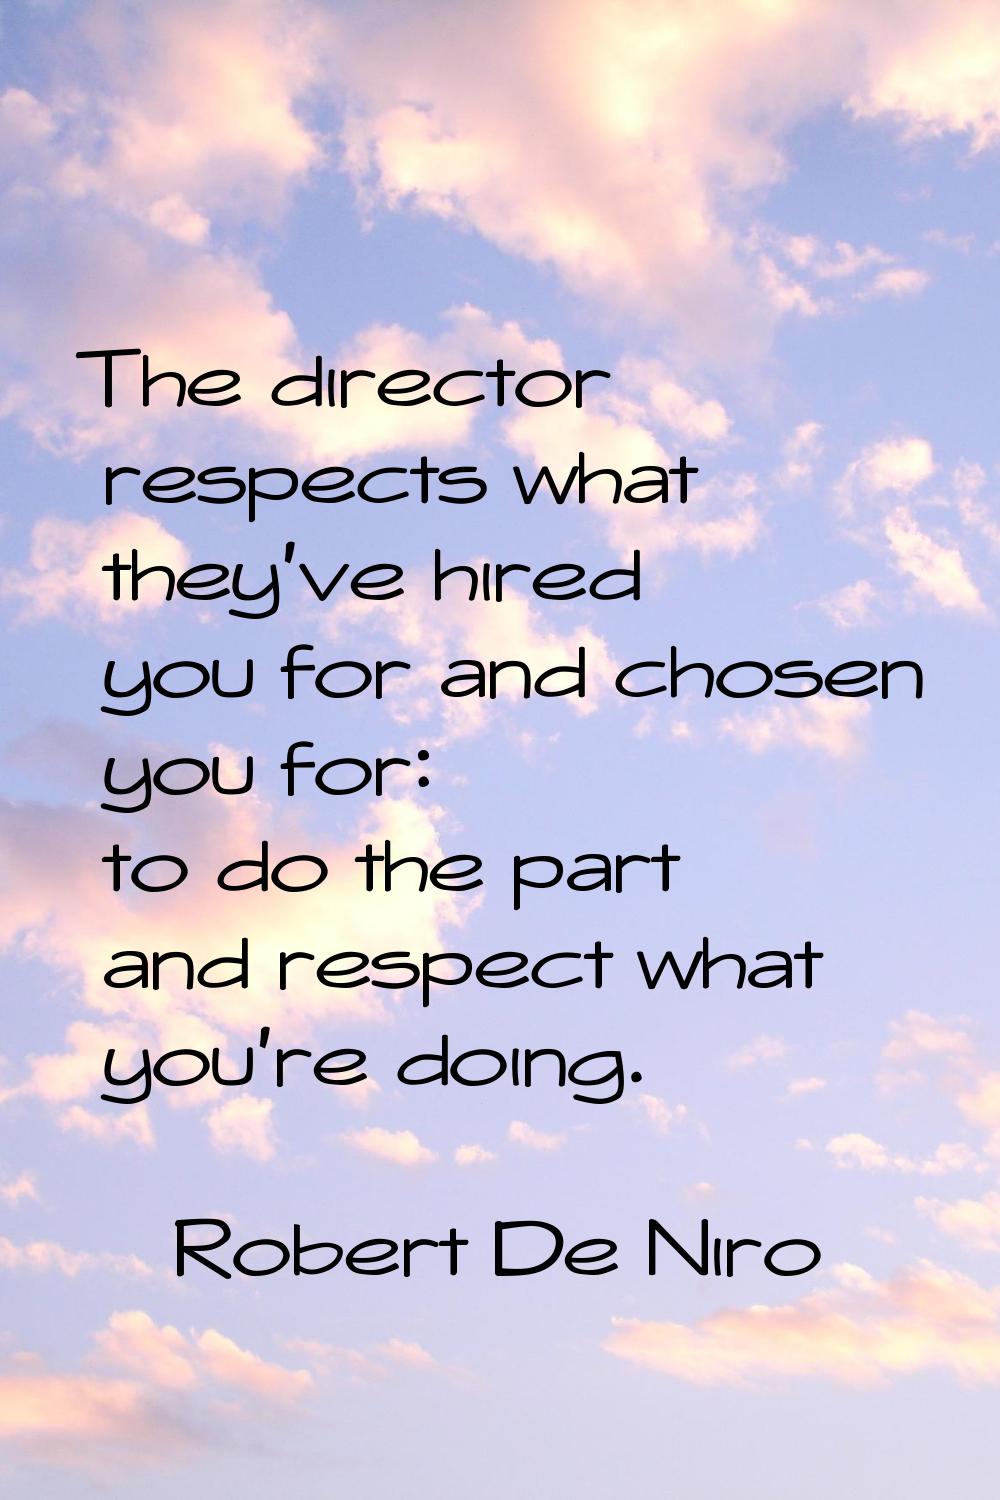 The director respects what they've hired you for and chosen you for: to do the part and respect wha